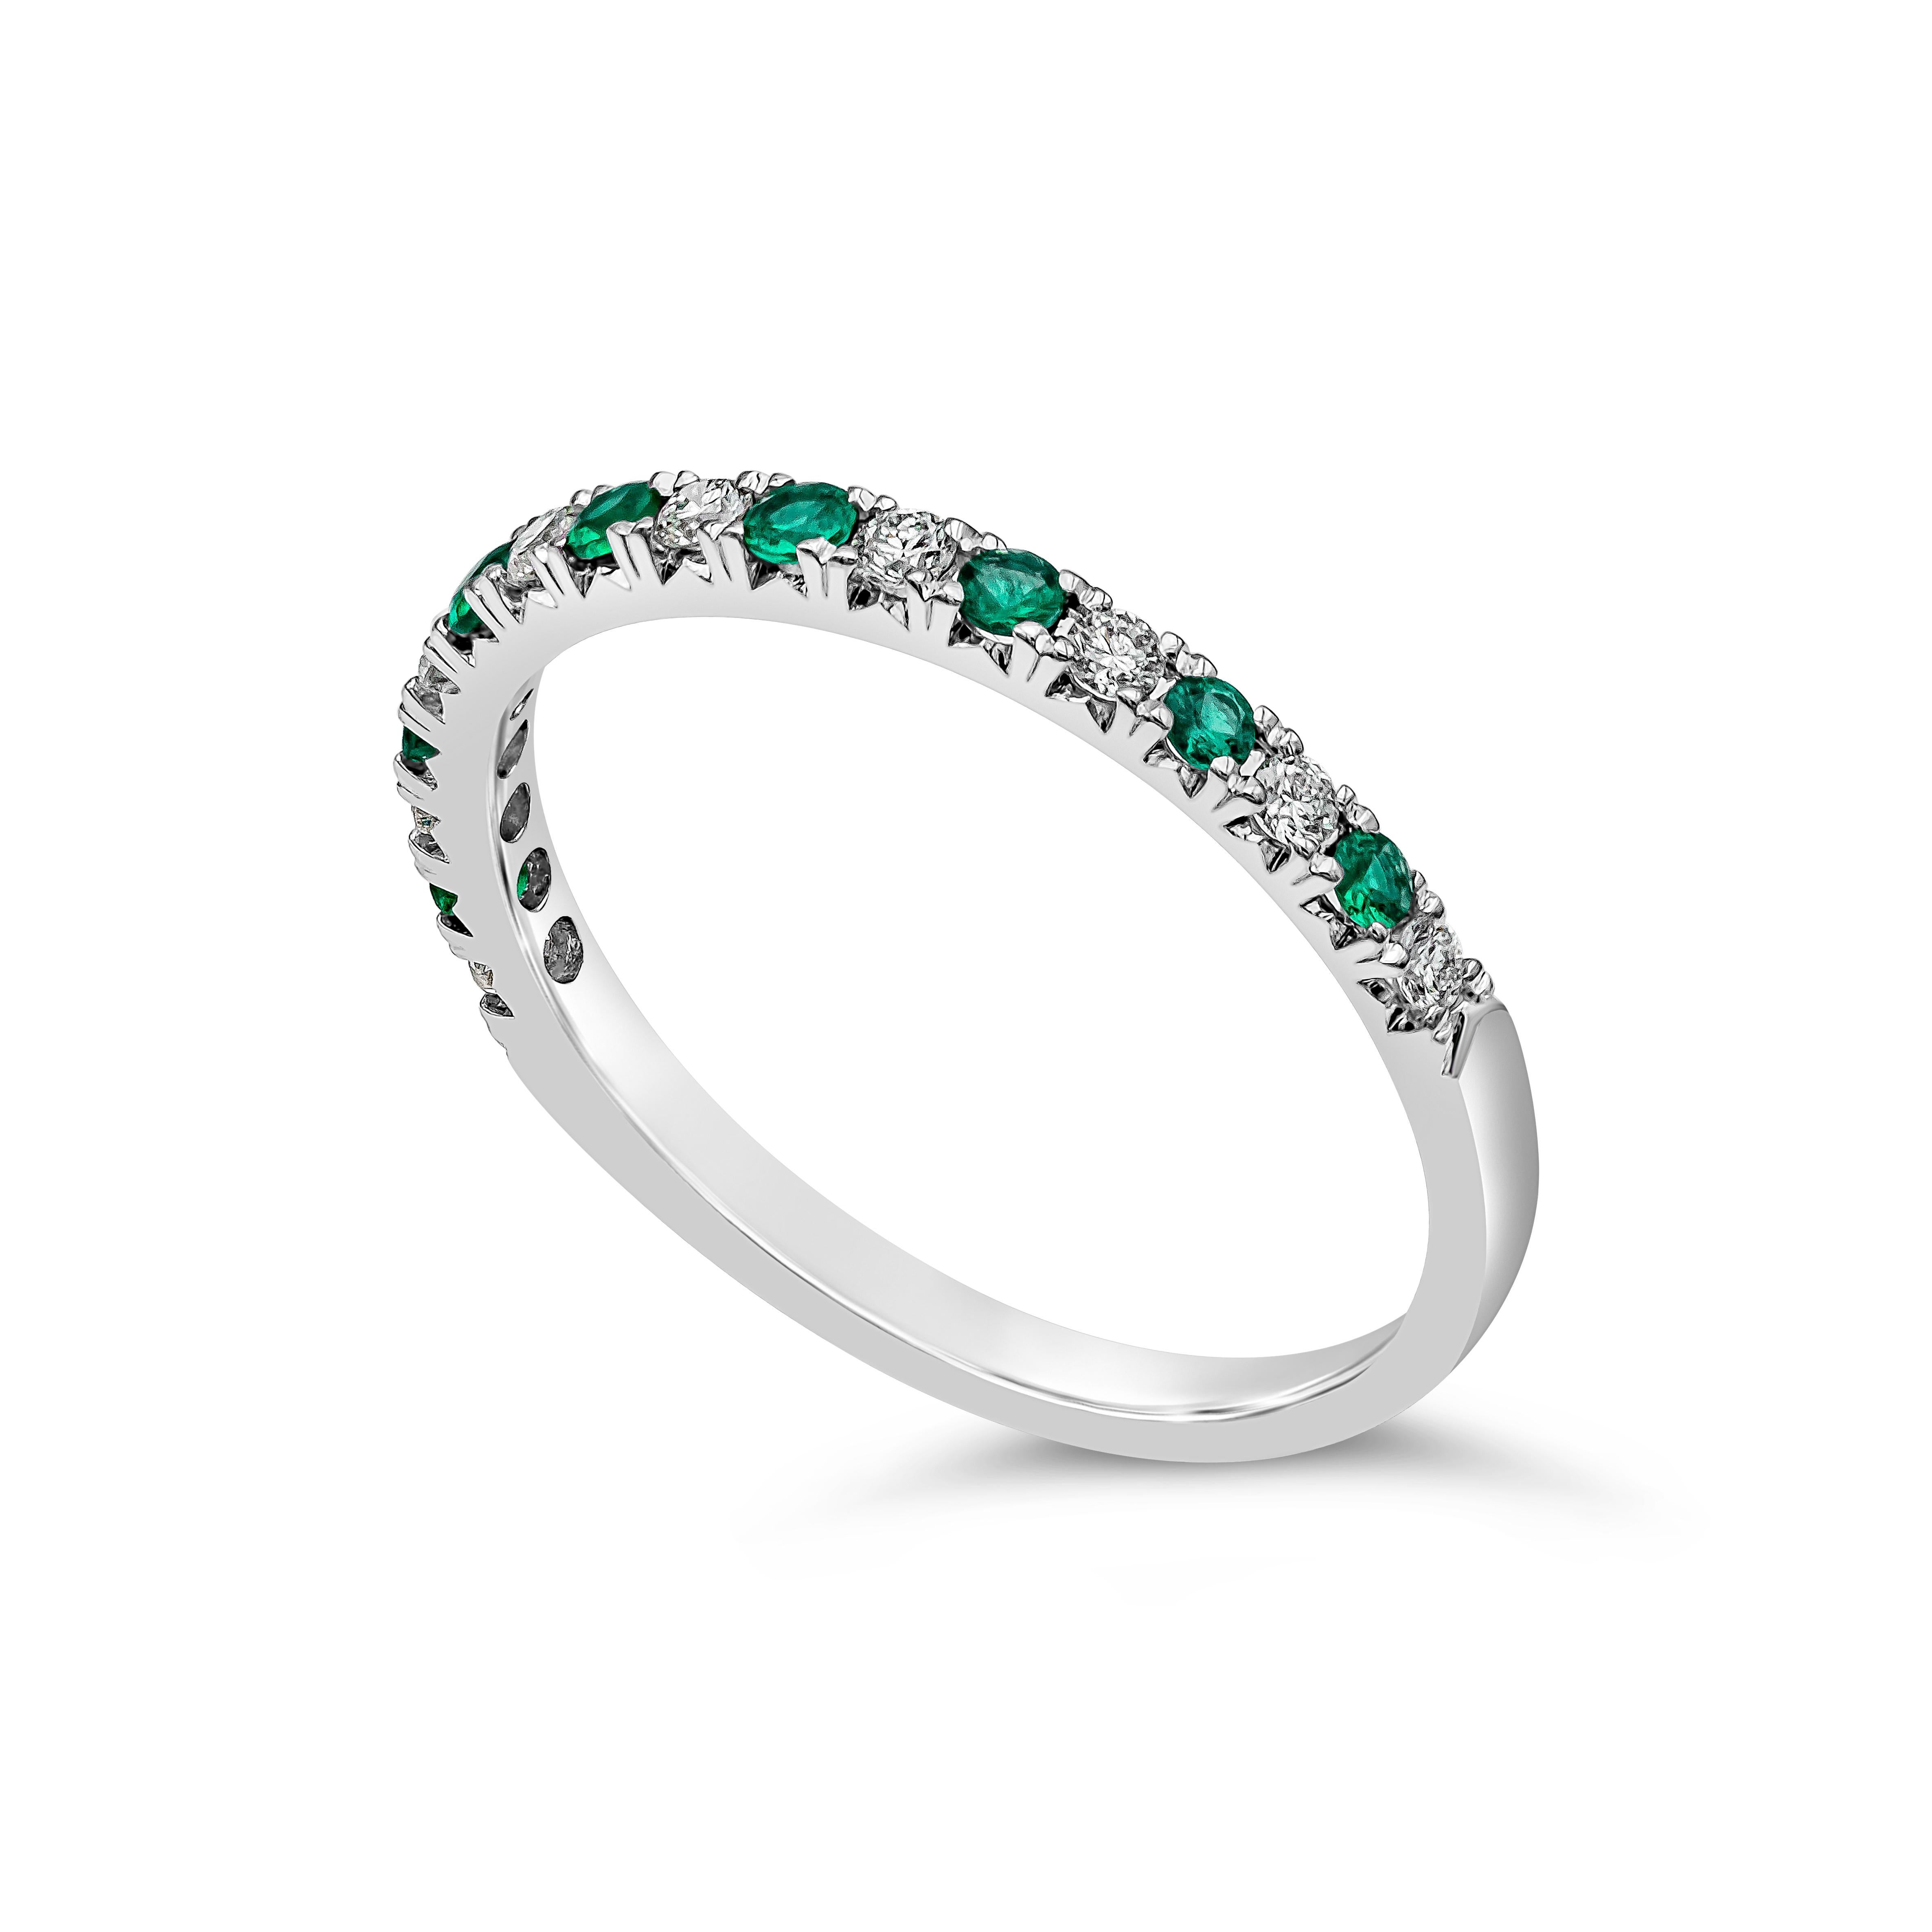 A unique wedding band style showcasing green emerald weighs 0.13 carats total, diamonds weigh 0.15 carats total, F-G color and VS-SI clarity. Made in 18k White Gold.

Style available in different price ranges. Prices are based on gemstone and